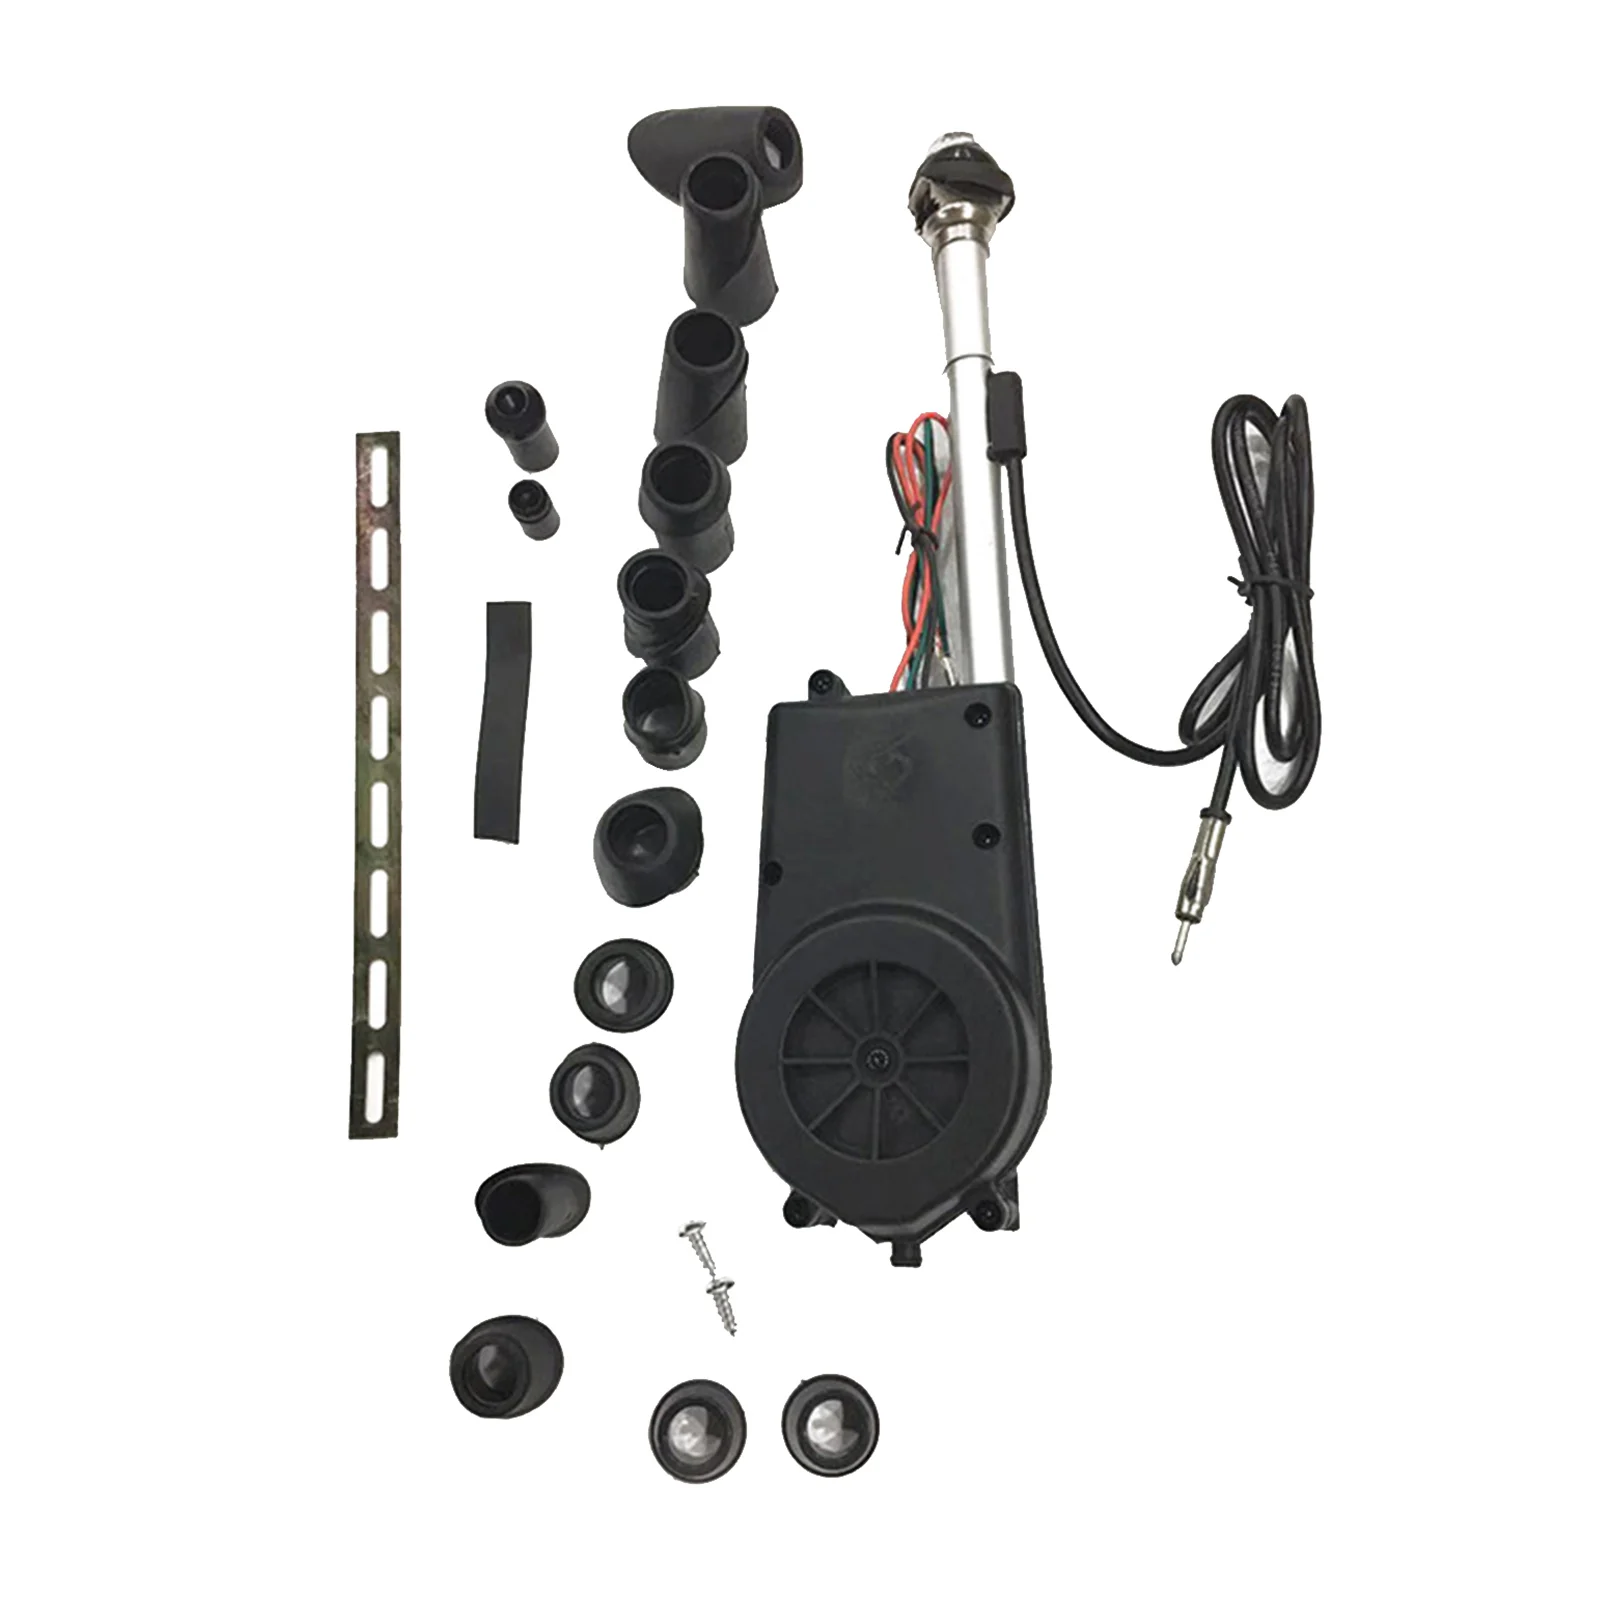   Fitting Set with Mounting Head / Radio, Durable Premium Material